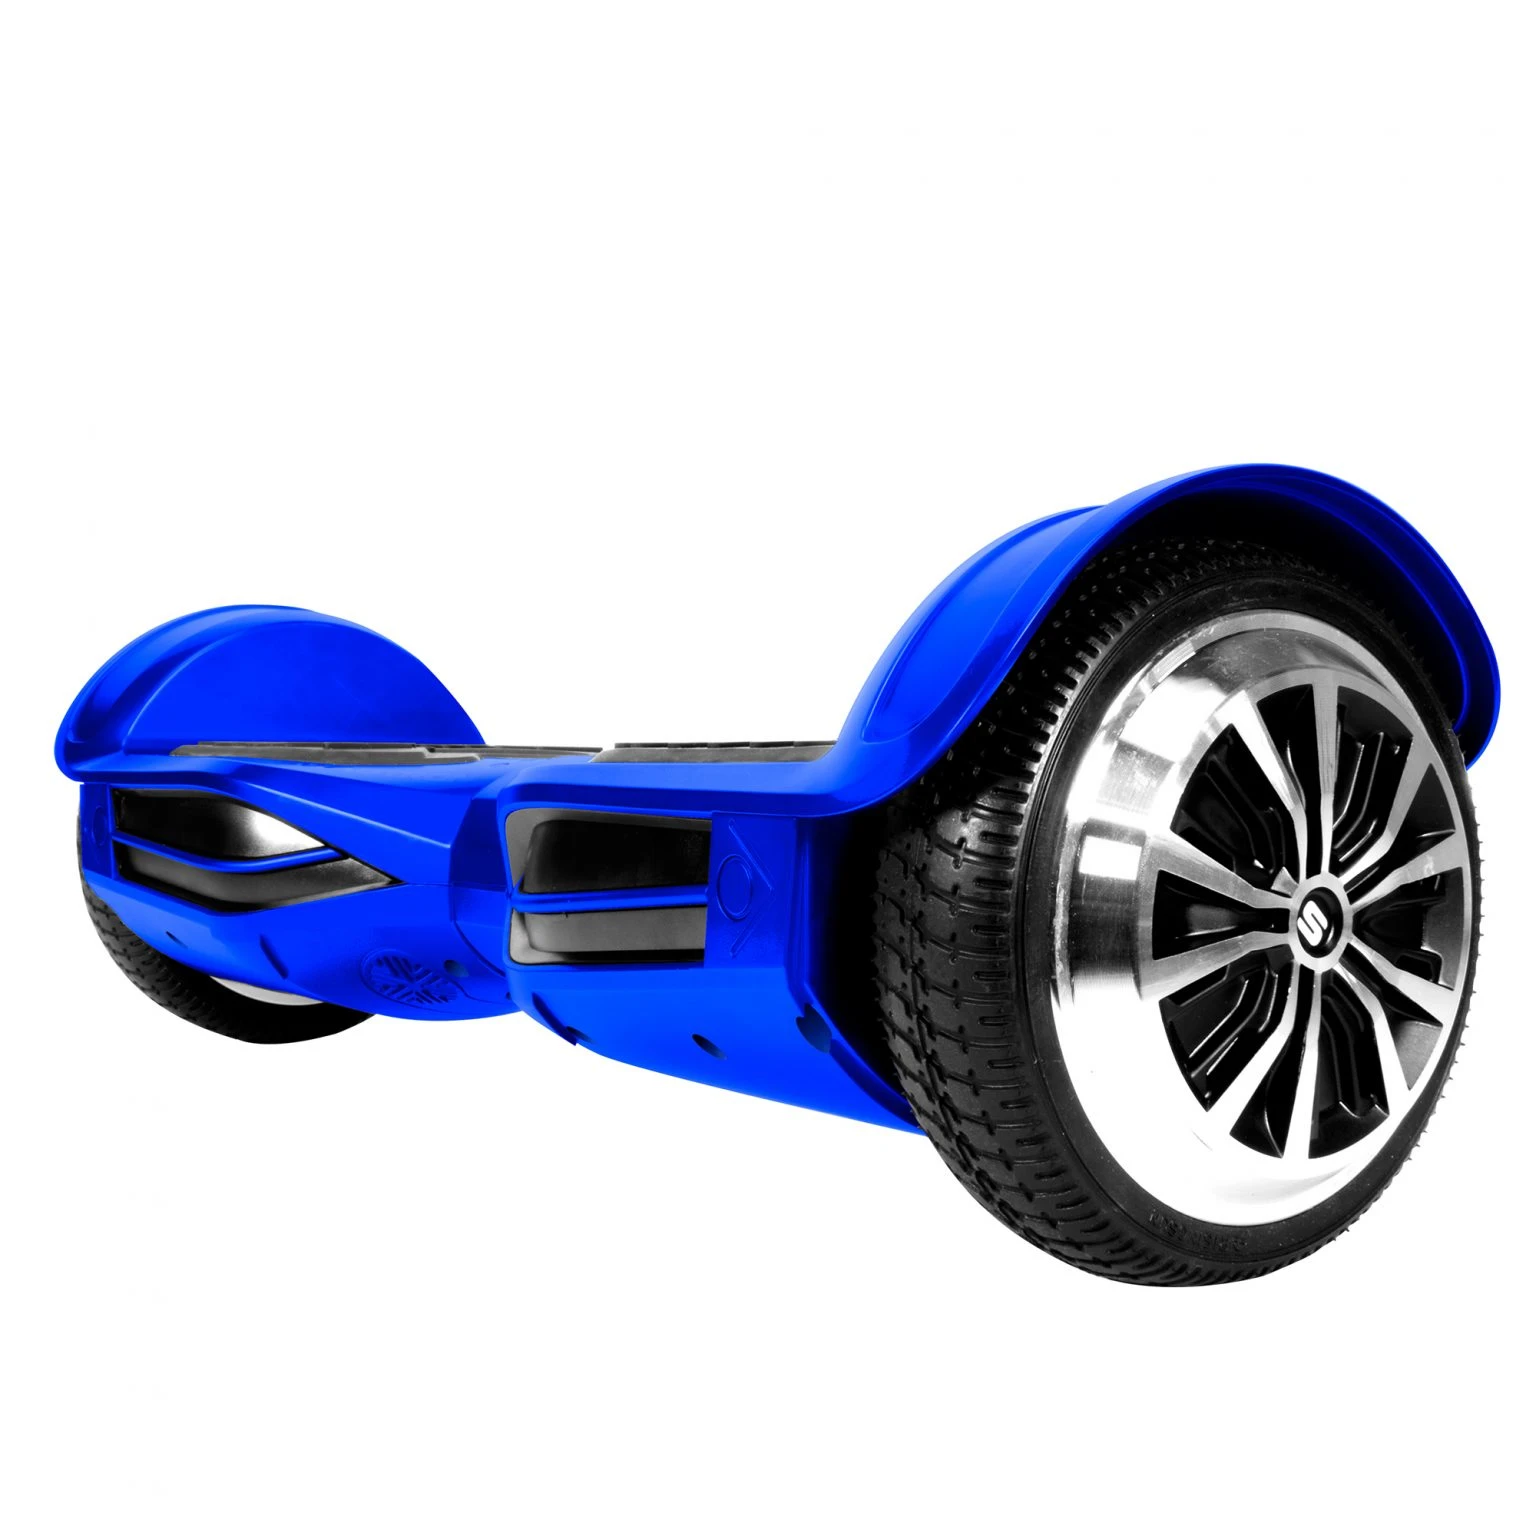 hoverboards-for-adults-Swagtron-T380-Elite